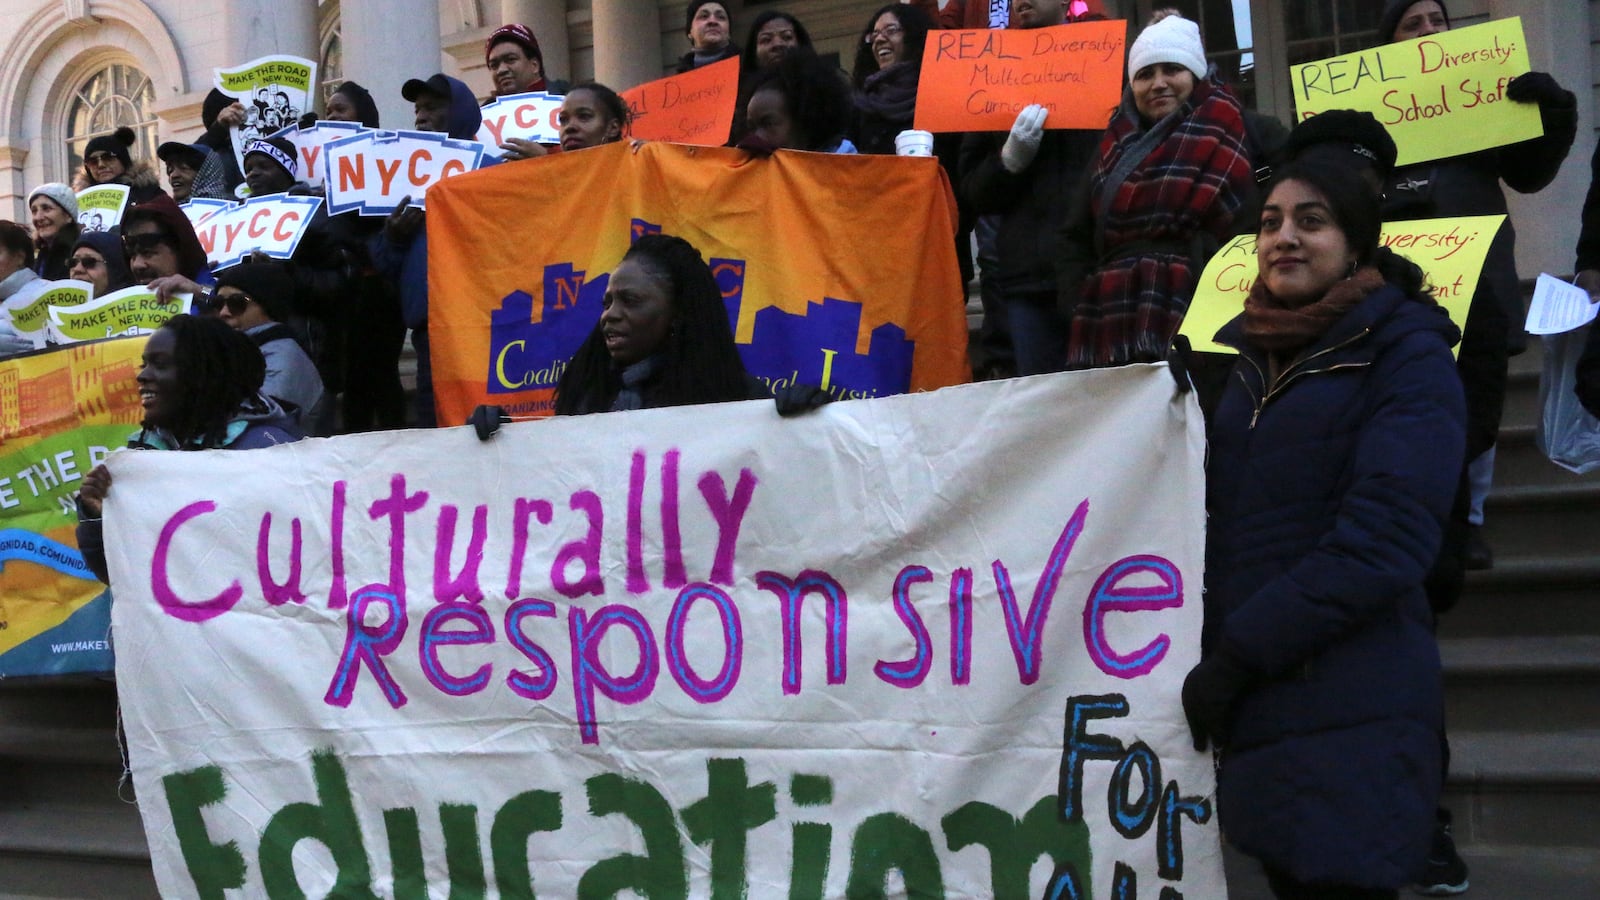 Advocates rallied at City Hall in December 2017, to demand the education department provide anti-bias training for teachers and culturally relevant education for students.